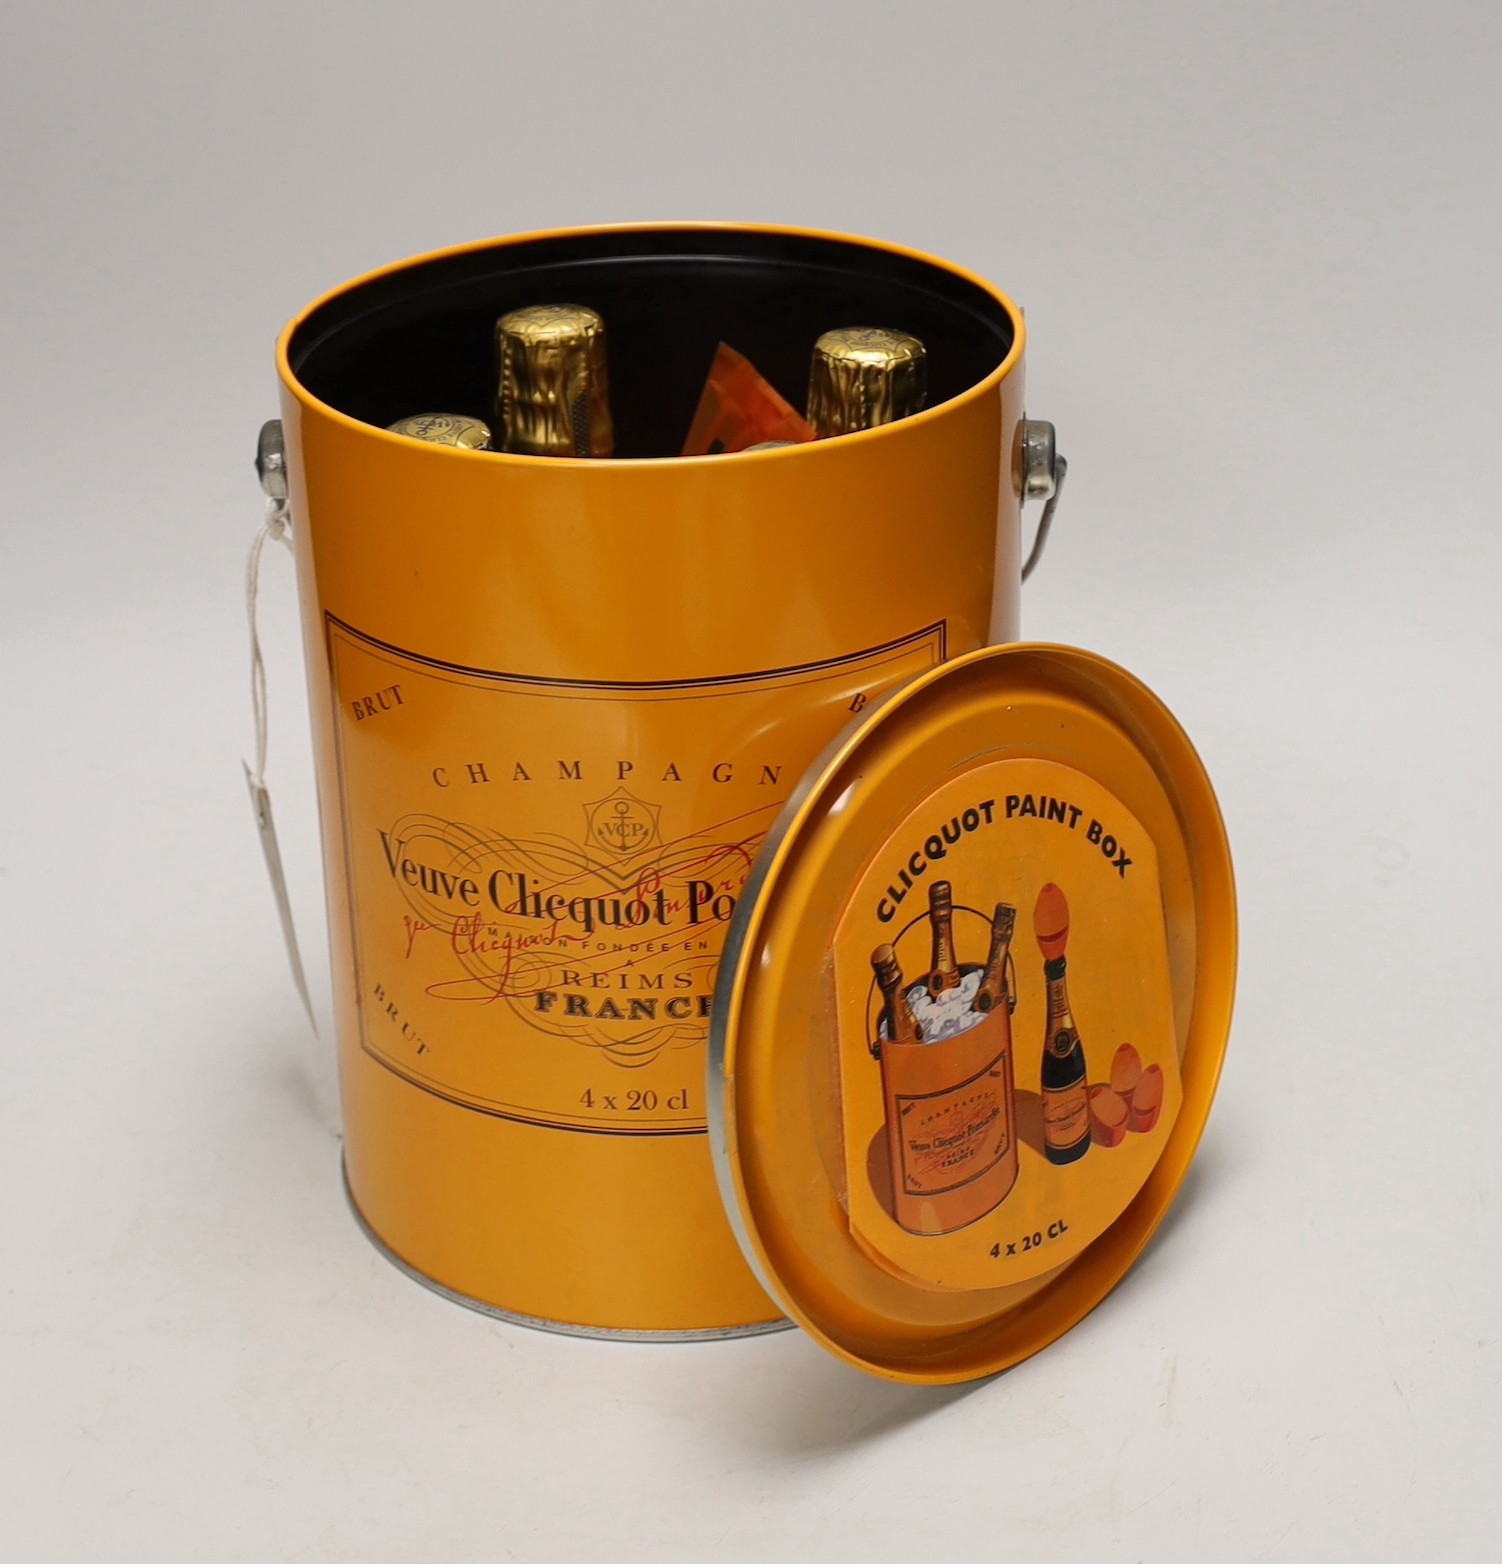 Veuve Clicquot Ponjardin champagne 4 x 20cl in ‘paint box’ - Image 2 of 3